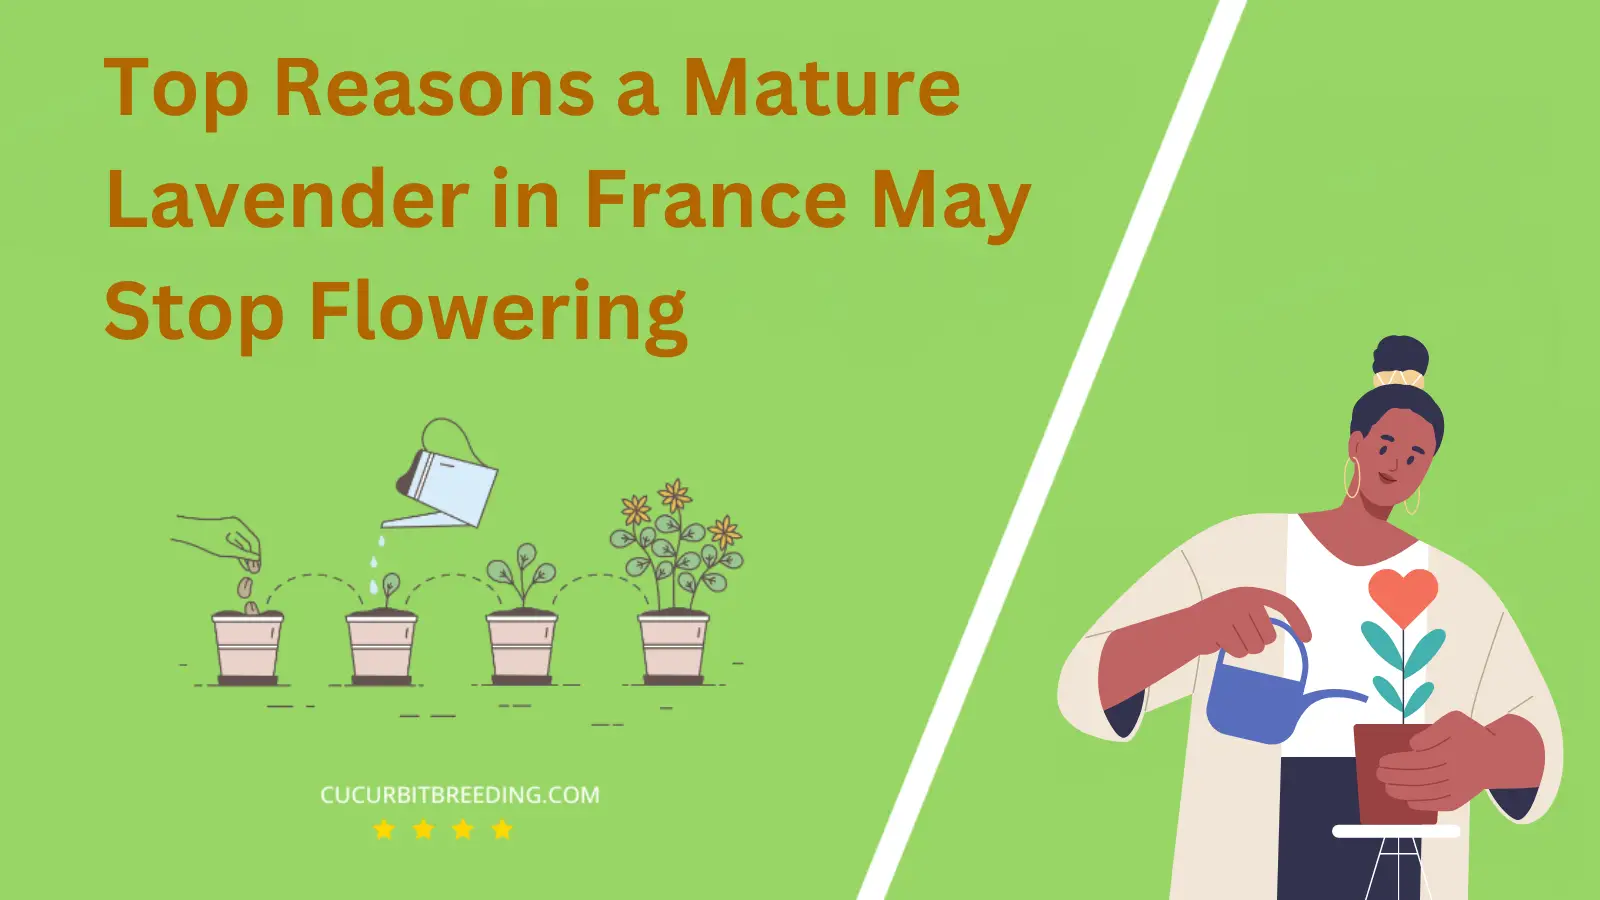 Top Reasons a Mature Lavender in France May Stop Flowering